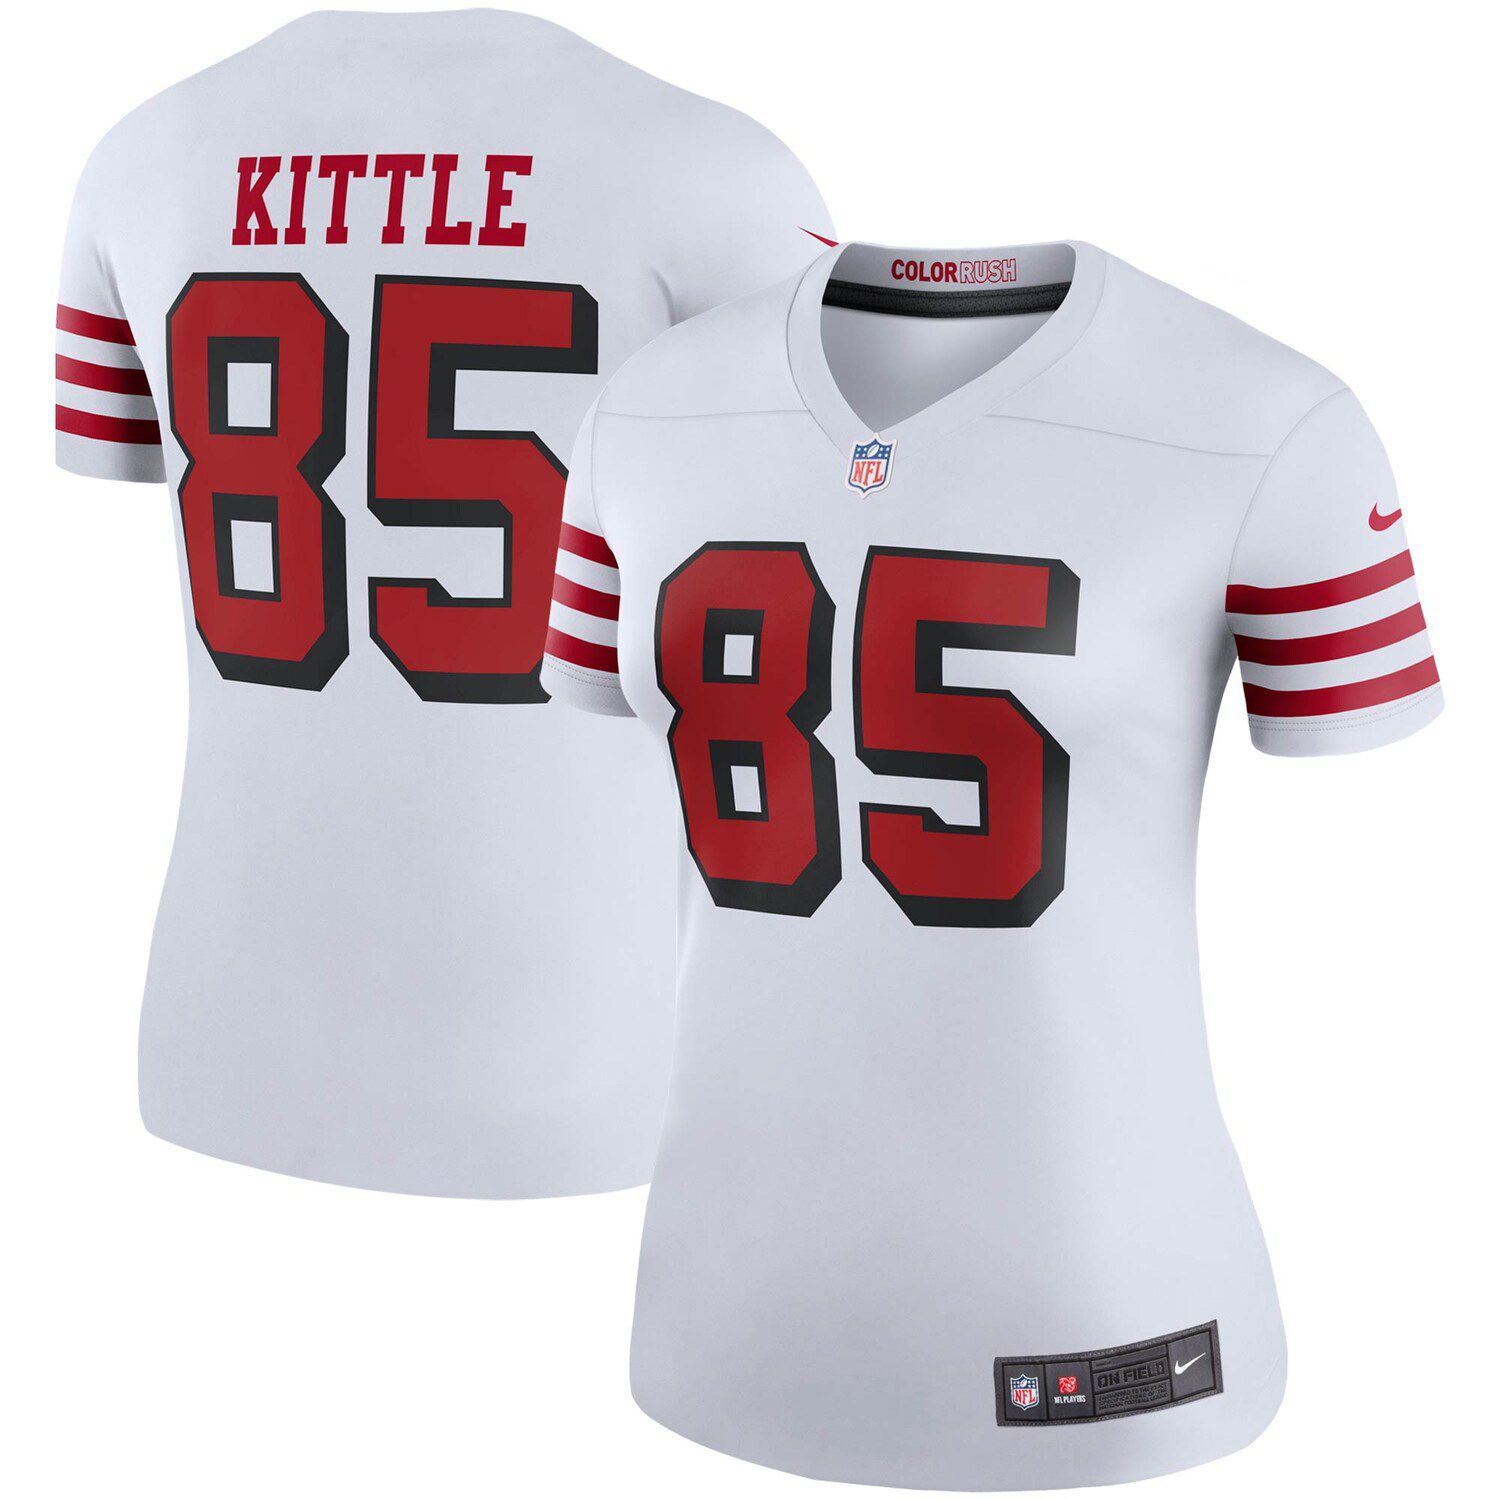 kittle color rush jersey